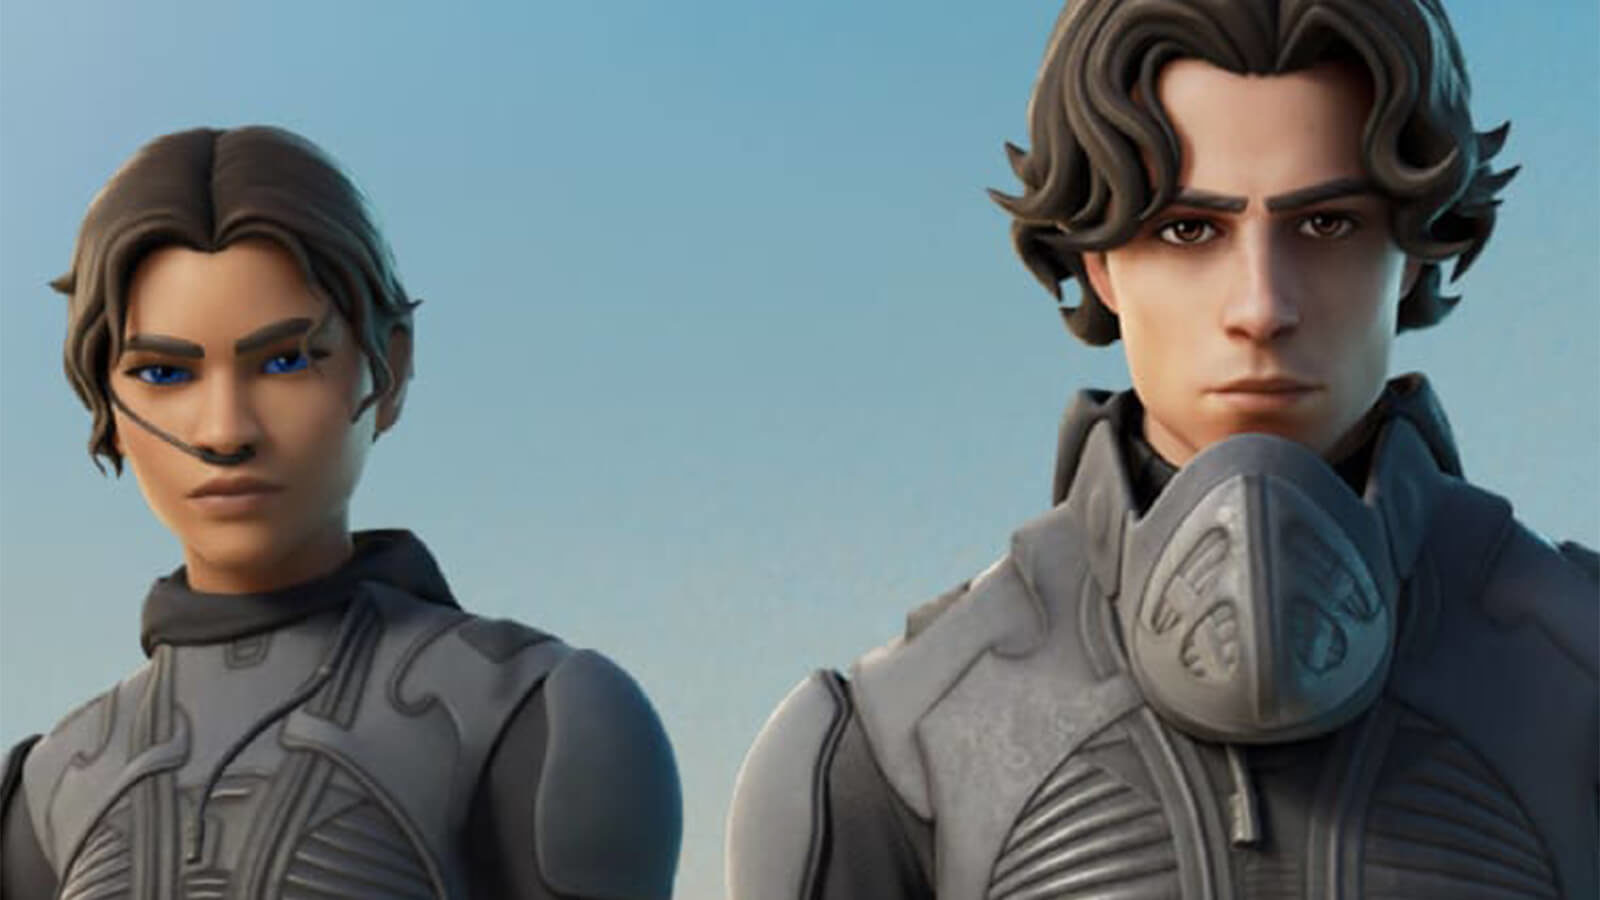 Paul Atreides and Chani Travel from Planet Dune to the Fortnite Item Shop